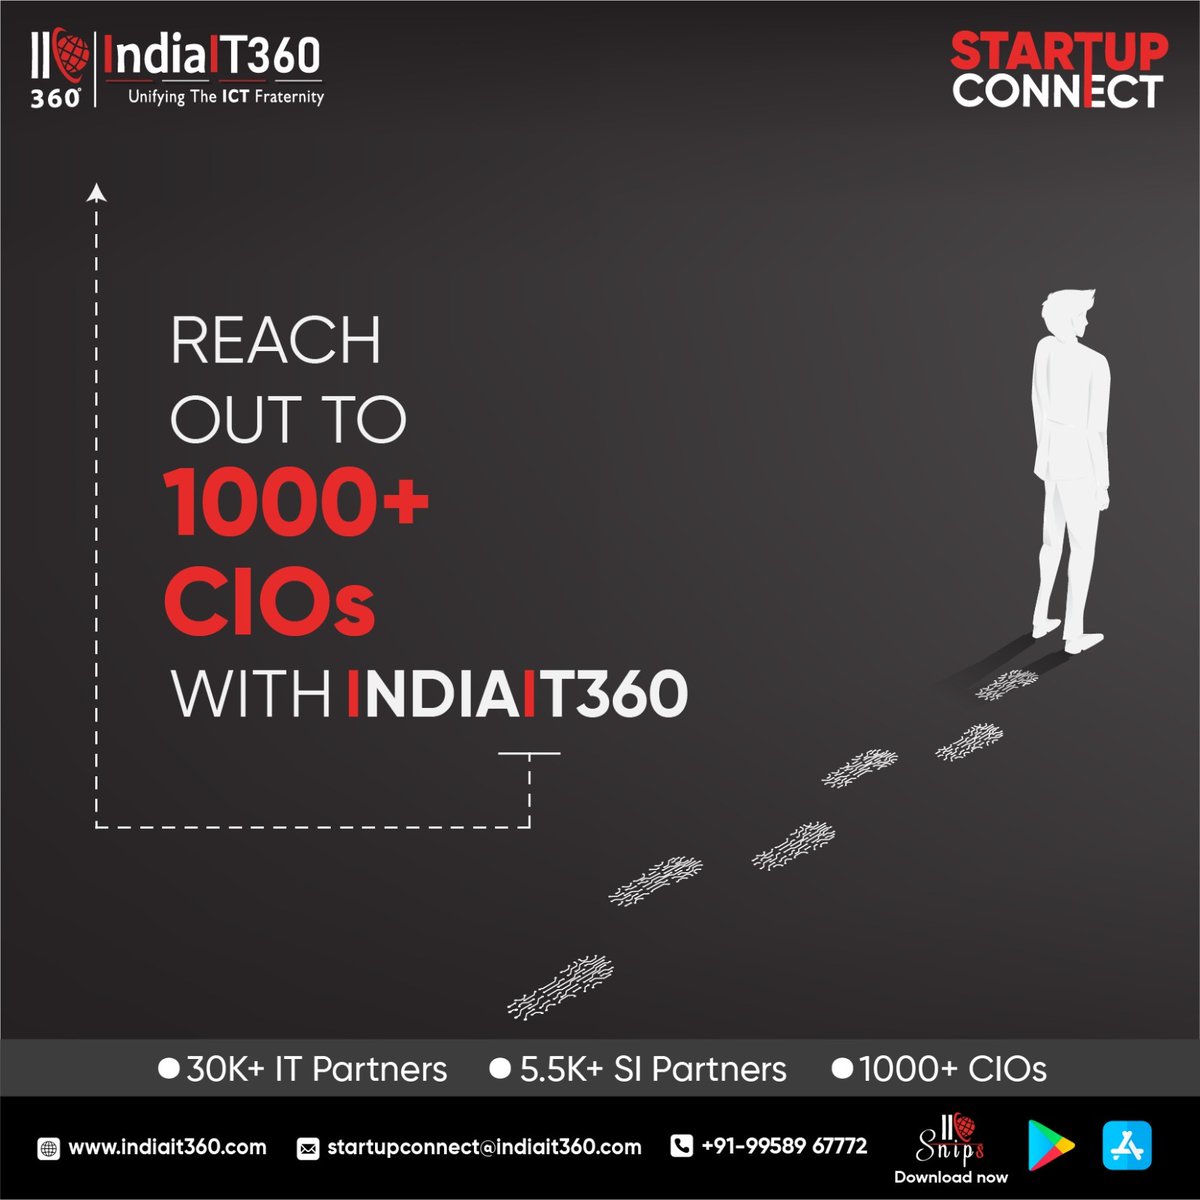 Connect your Startup business with 1000+ CIOs and unlock new opportunities for growth and collaboration!

Don't miss this chance to take your Startup to the next level at indiait360.com/startup.php

#StartupSuccess #CIOConnect #IndiaIT360 #NetworkExpansion #CollaborateToInnovate